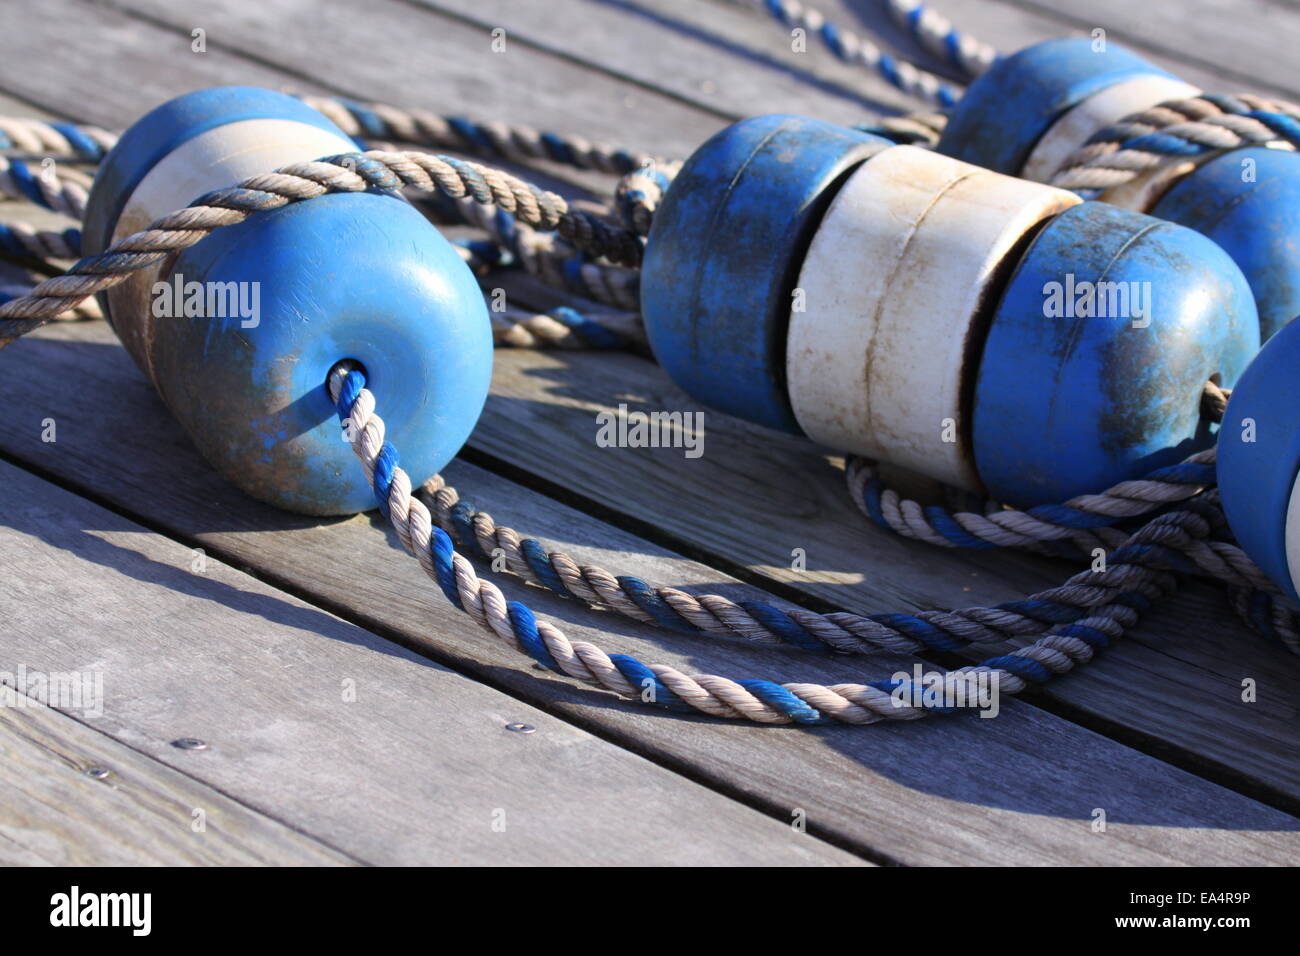 Nautical scene with blue buoys on a rope Stock Photo